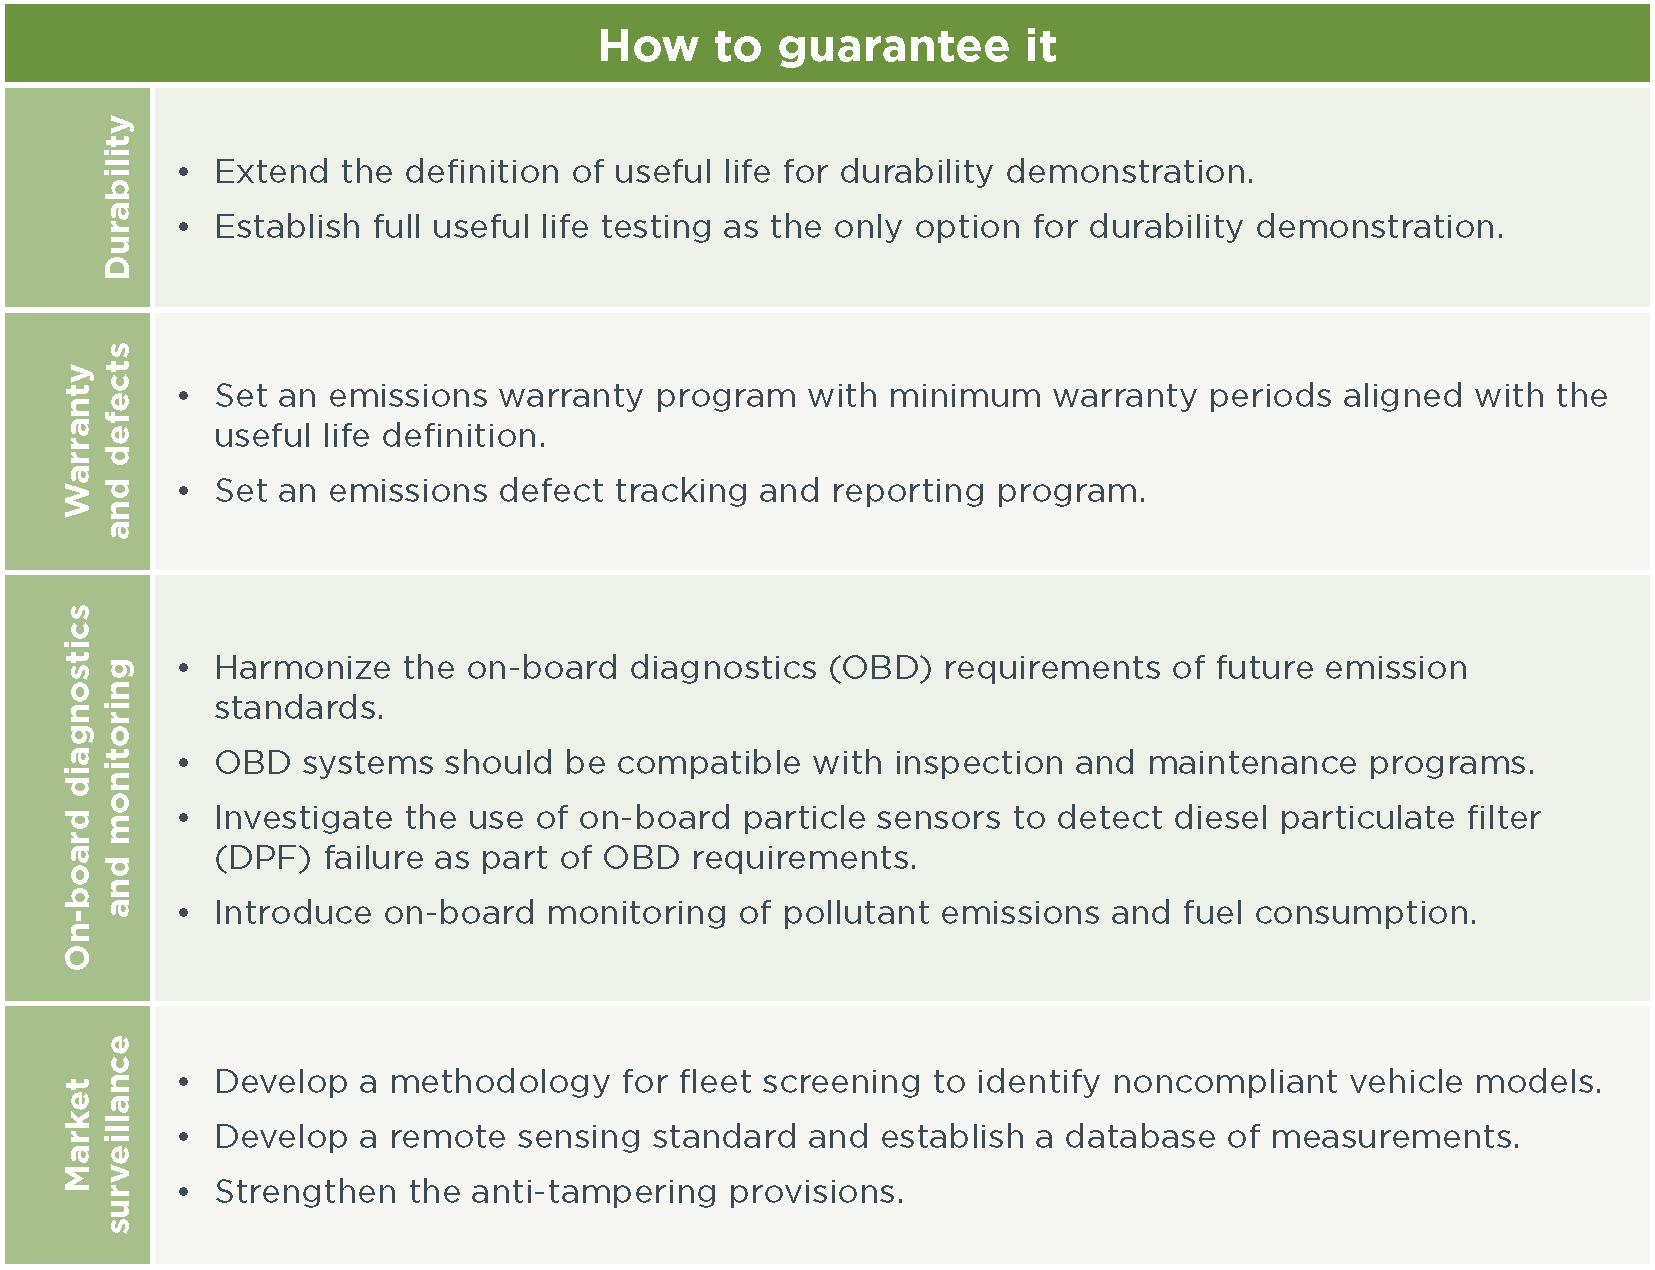 HDV standards how to guarantee it